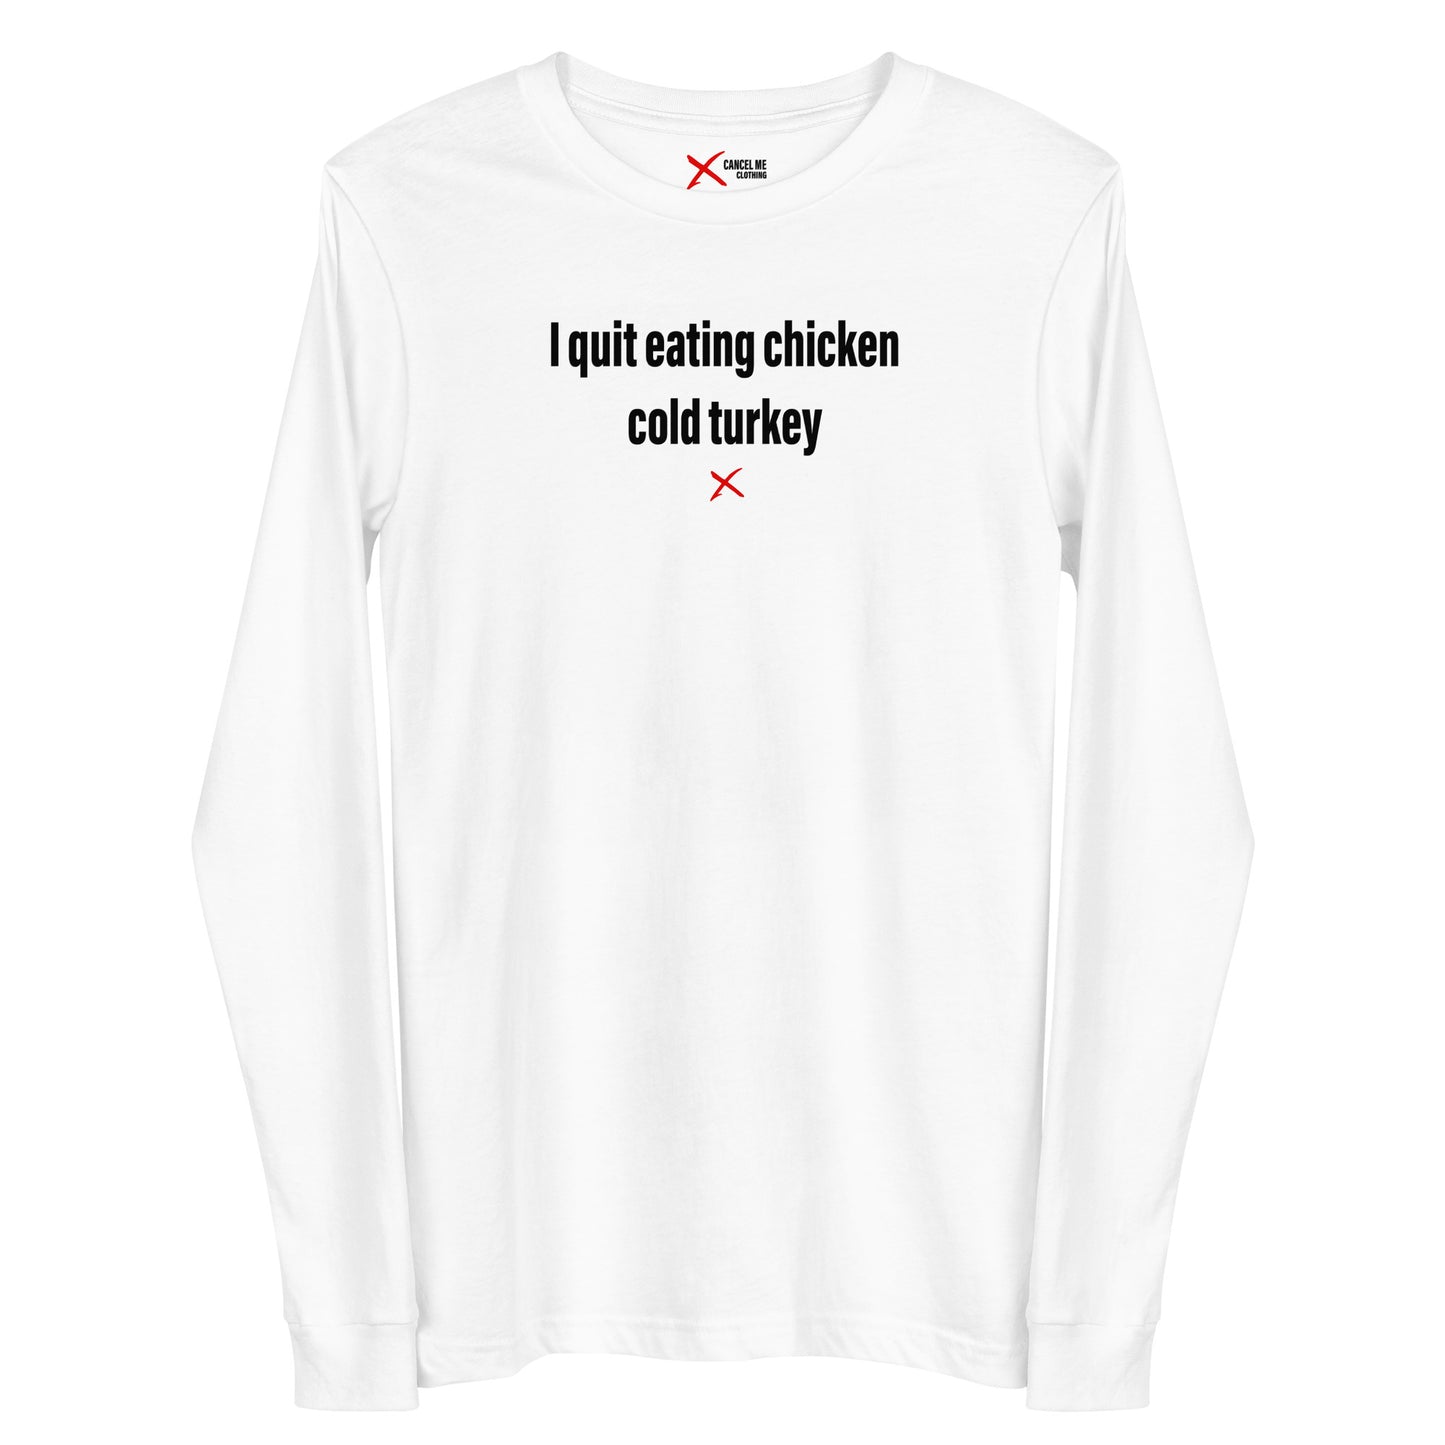 I quit eating chicken cold turkey - Longsleeve